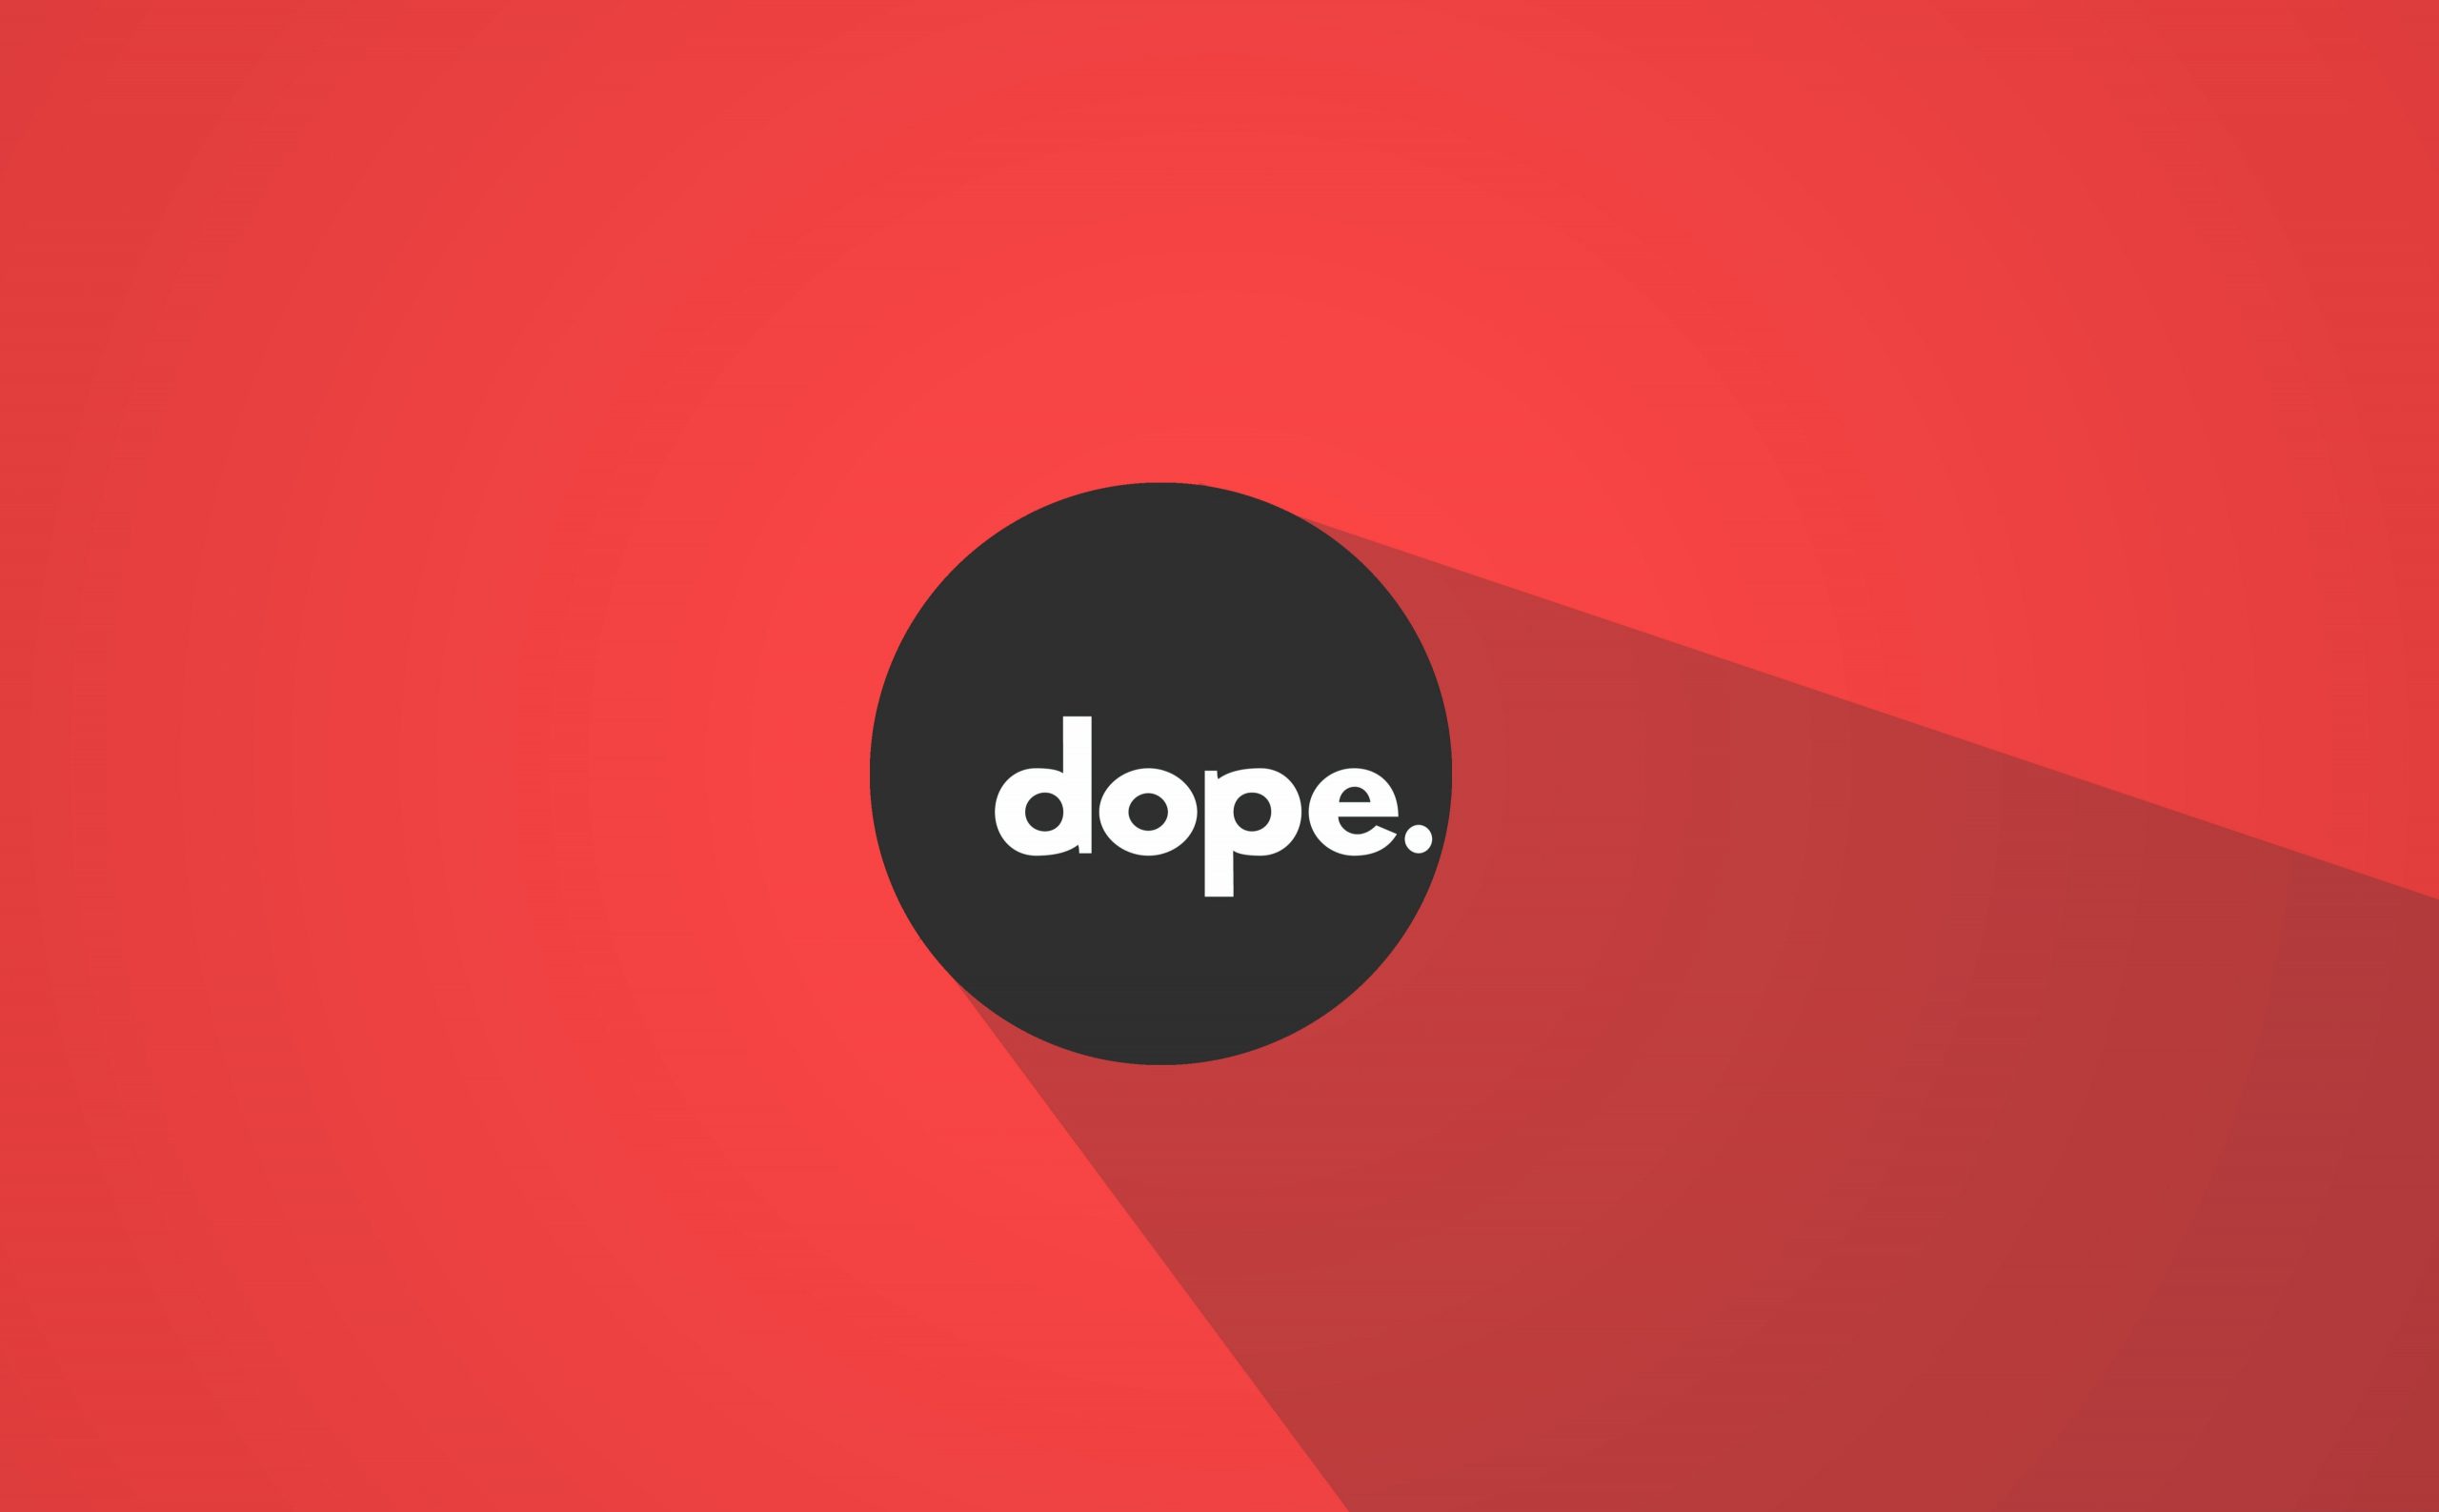 Dope. wallpaper, Artistic, Typography, design, red, communication, no people